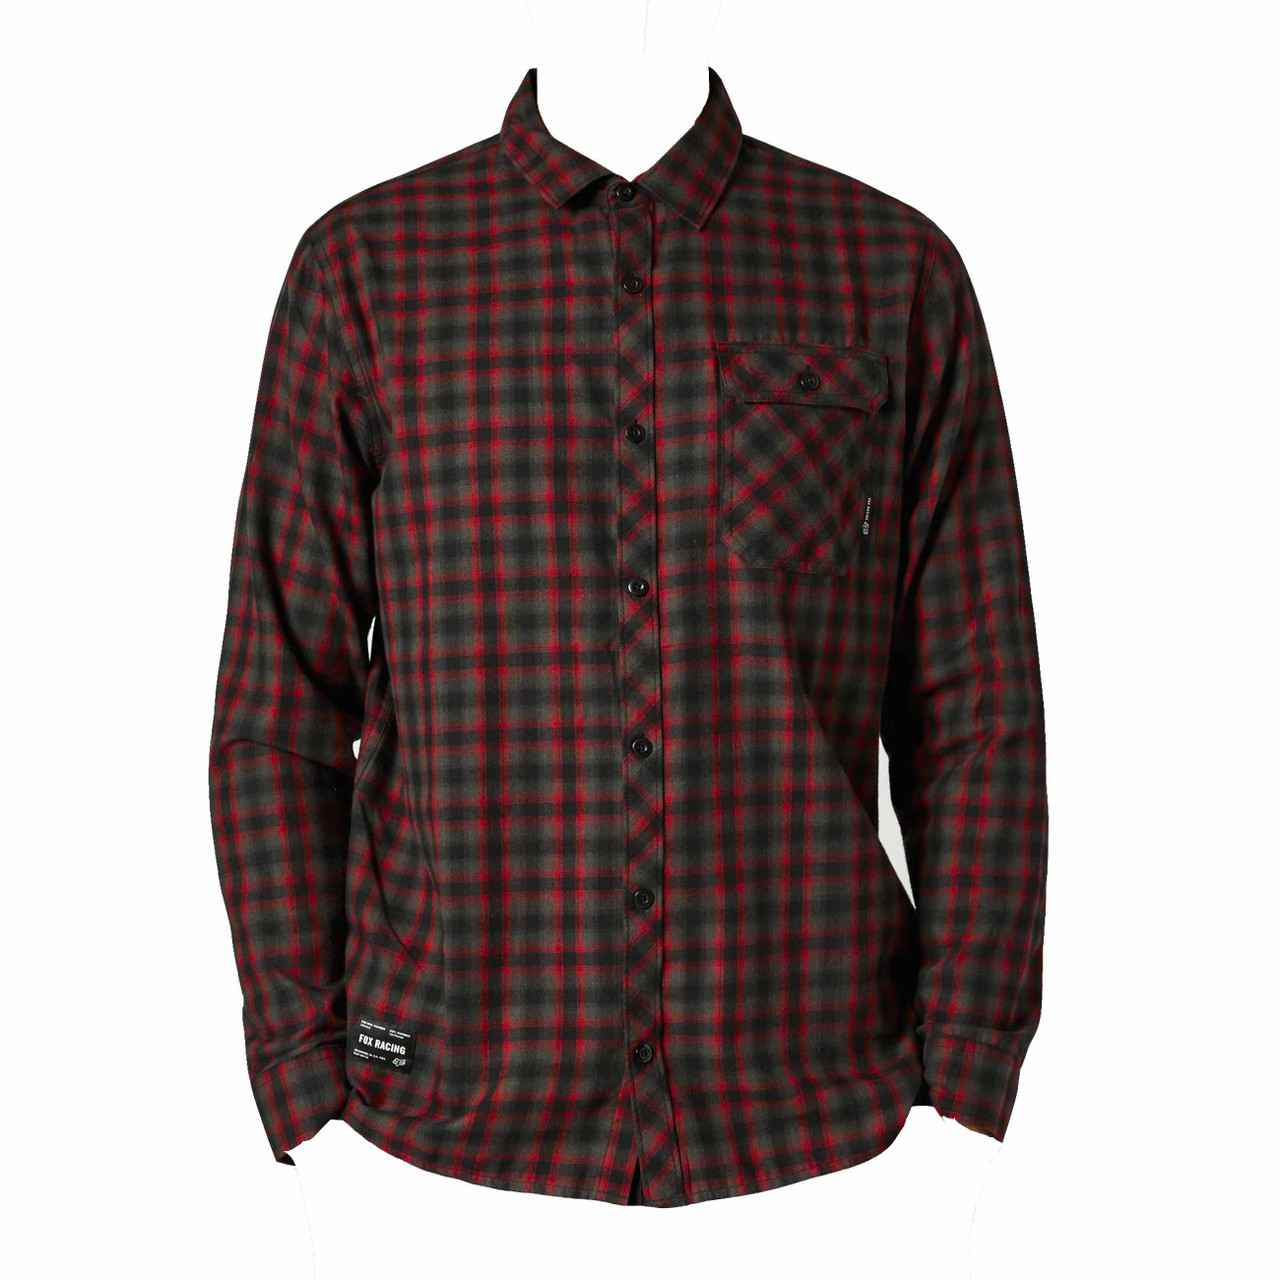 Fox Mens Reeves Plaid Long Sleeve Button Down Shirt Black Red - Hyped Sports